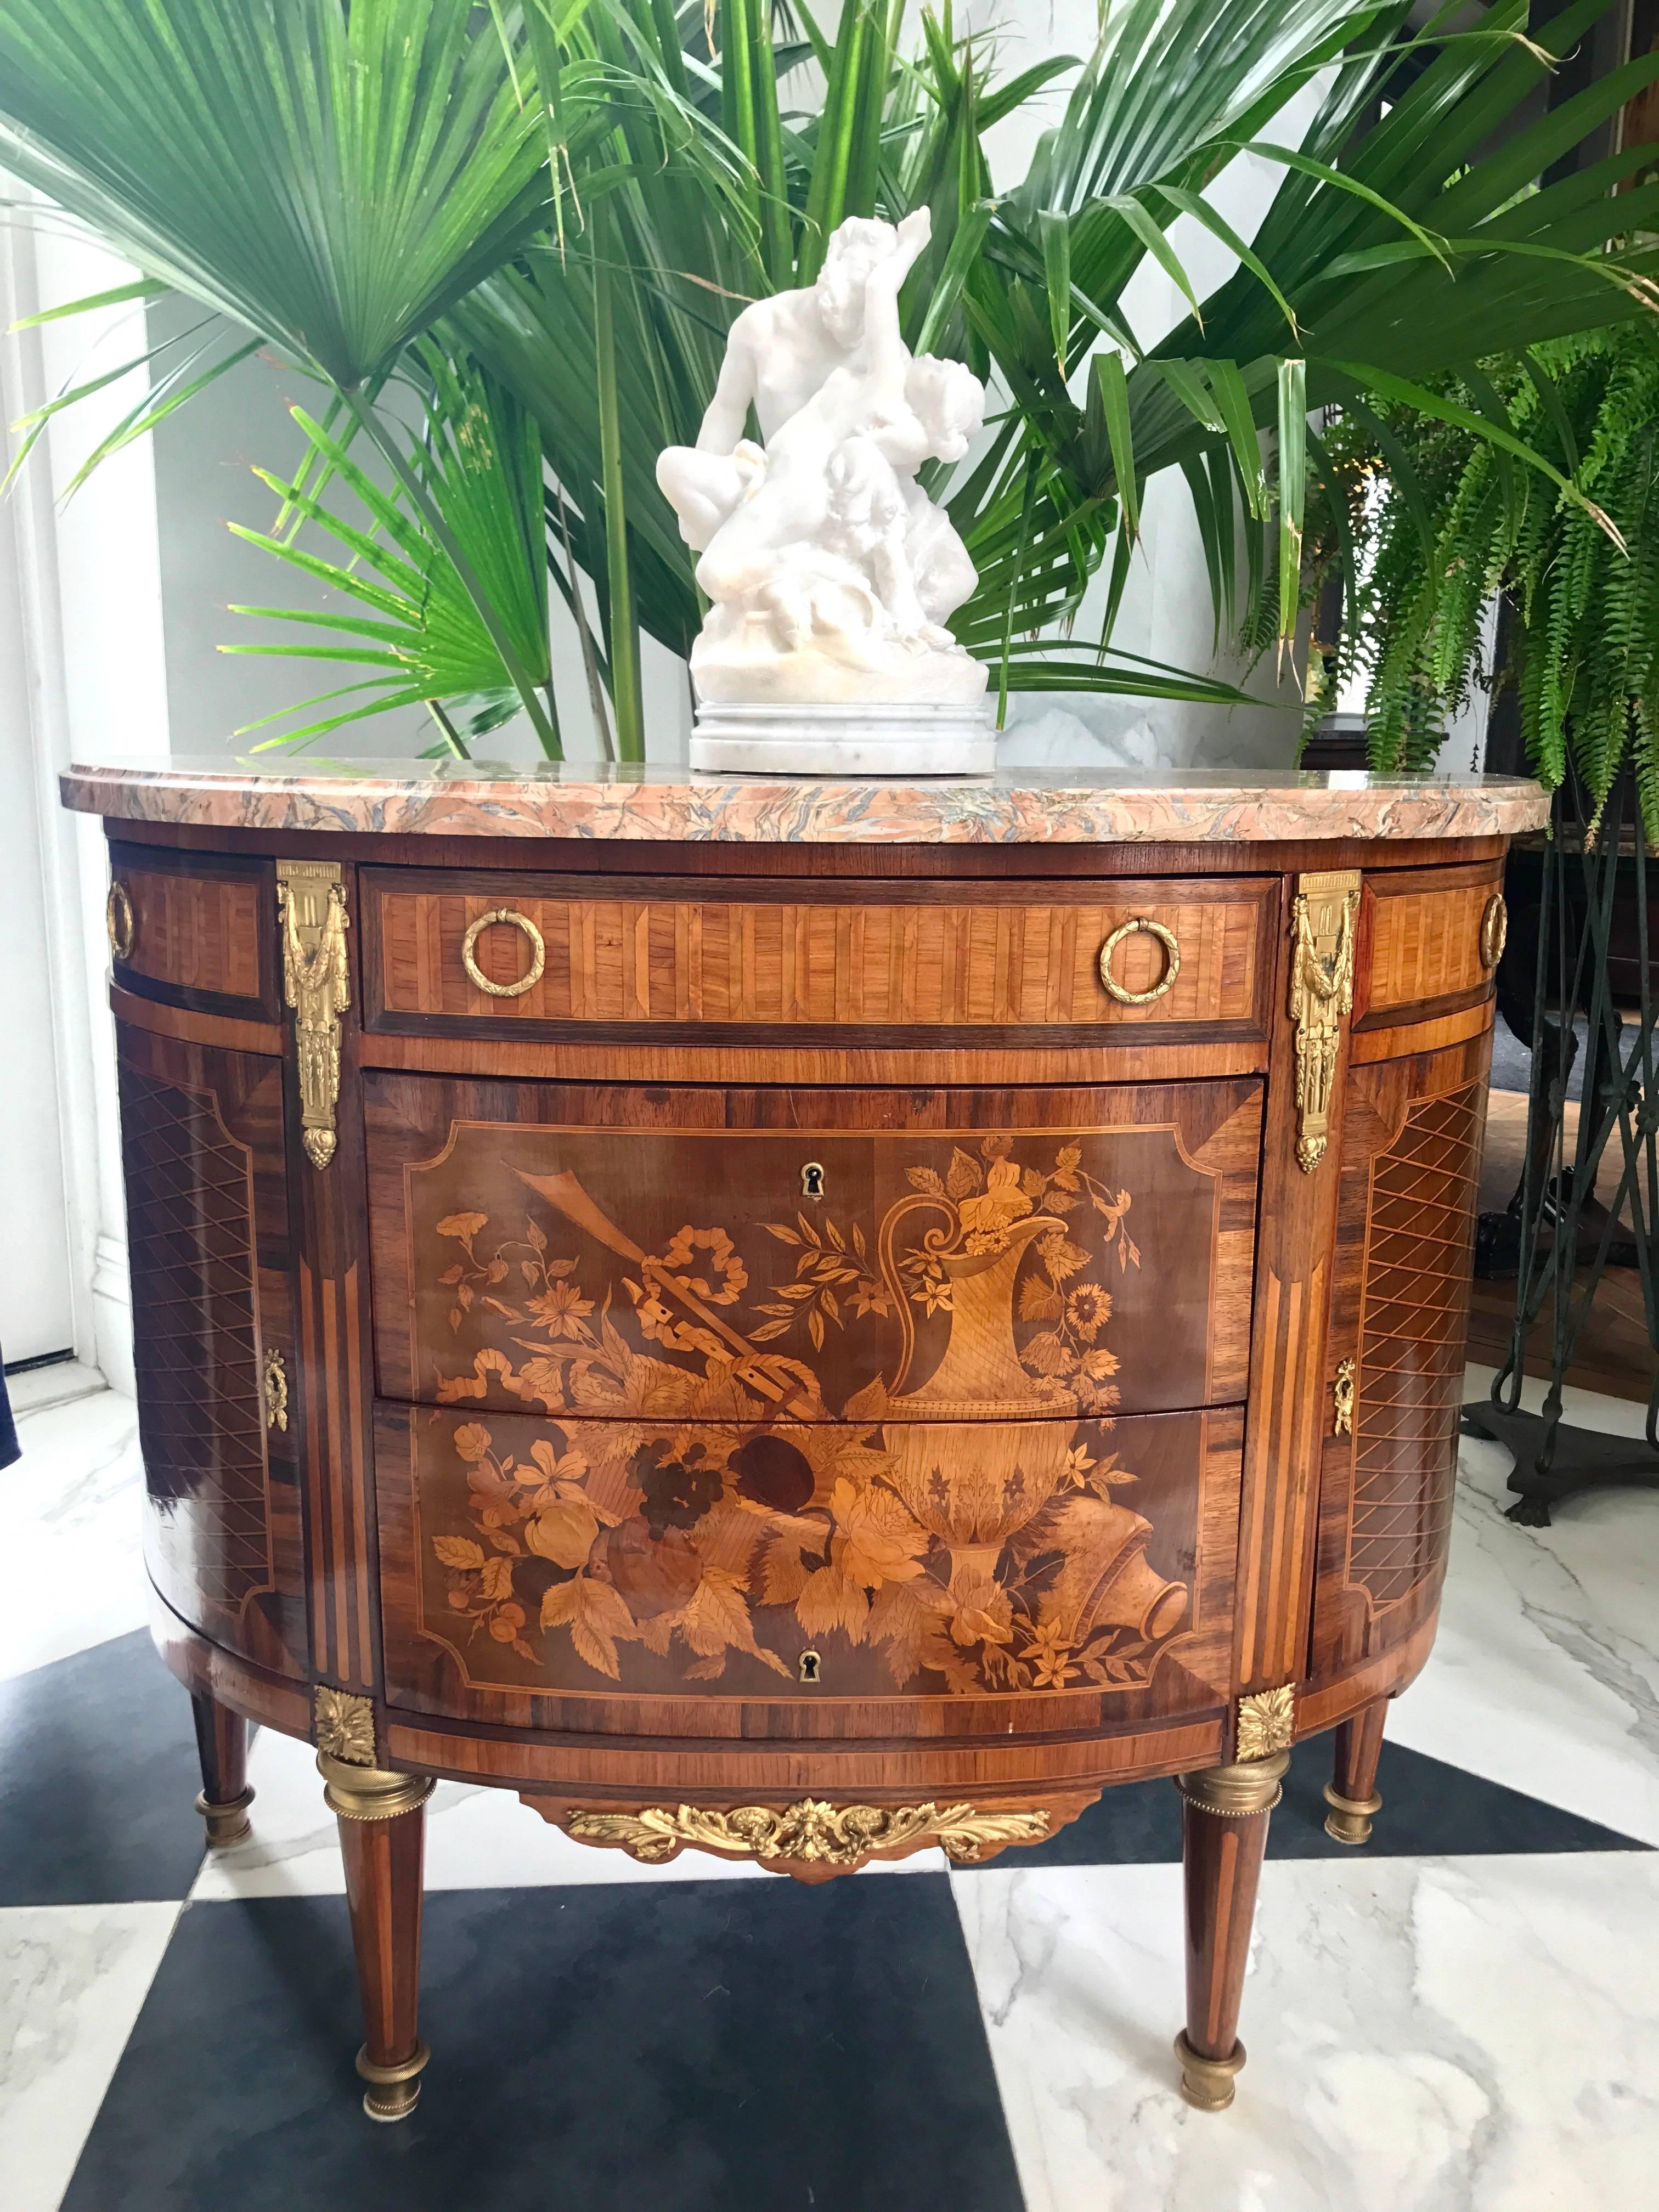 This is an awe dropping Louis XVI style commode displaying the finest craftsmanship in the manner of Charles Topino. The main focus goes to the central drawers, which are elaborately inlaid with multiple wood varieties depicting a ewer, an urn and